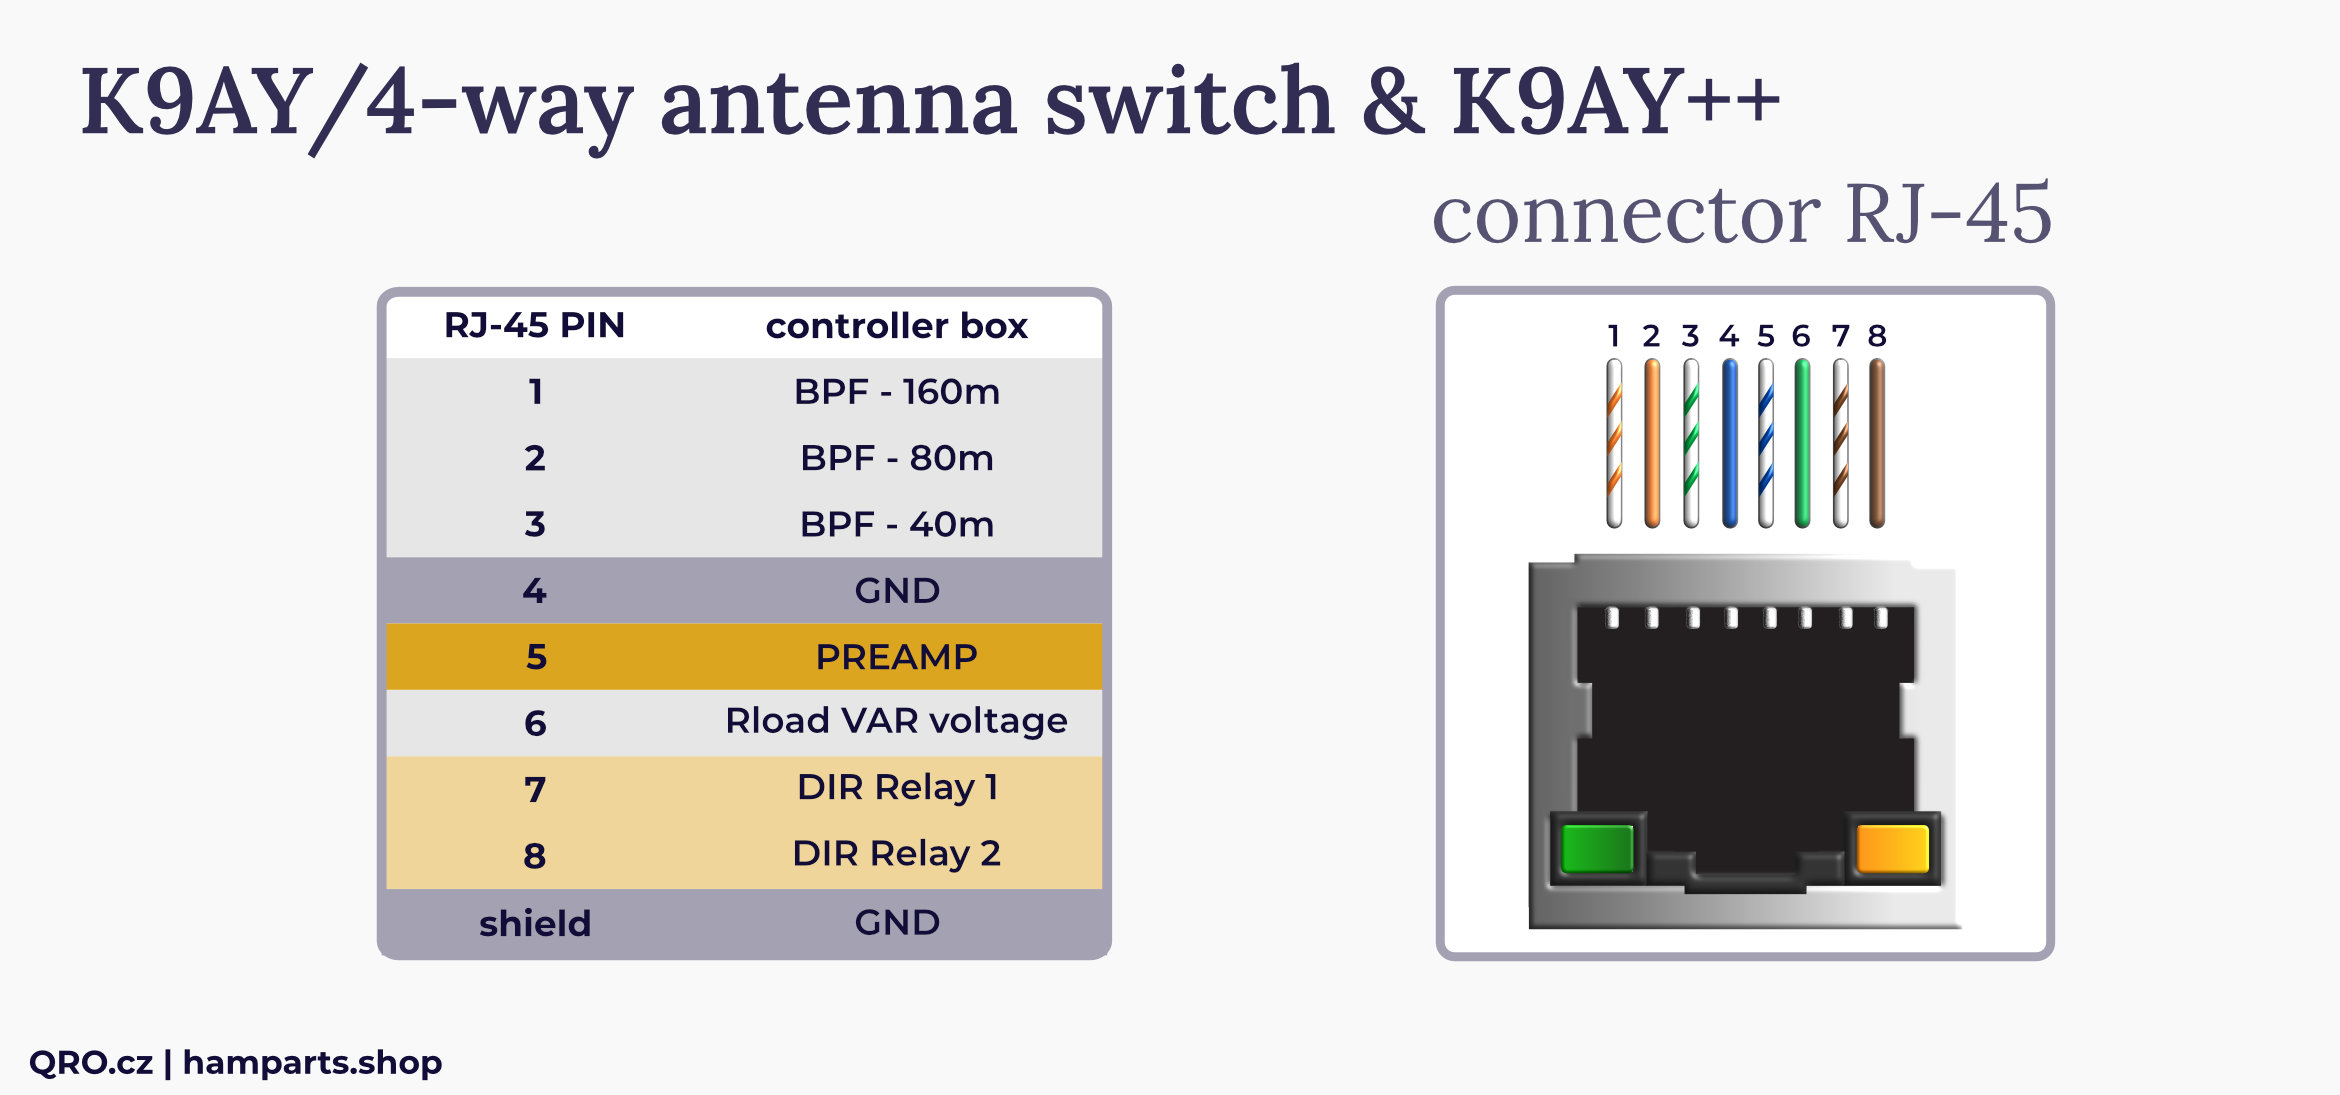 k9ay 4-way antenna switch controller connector rj45 qro.cz hamparts.shop